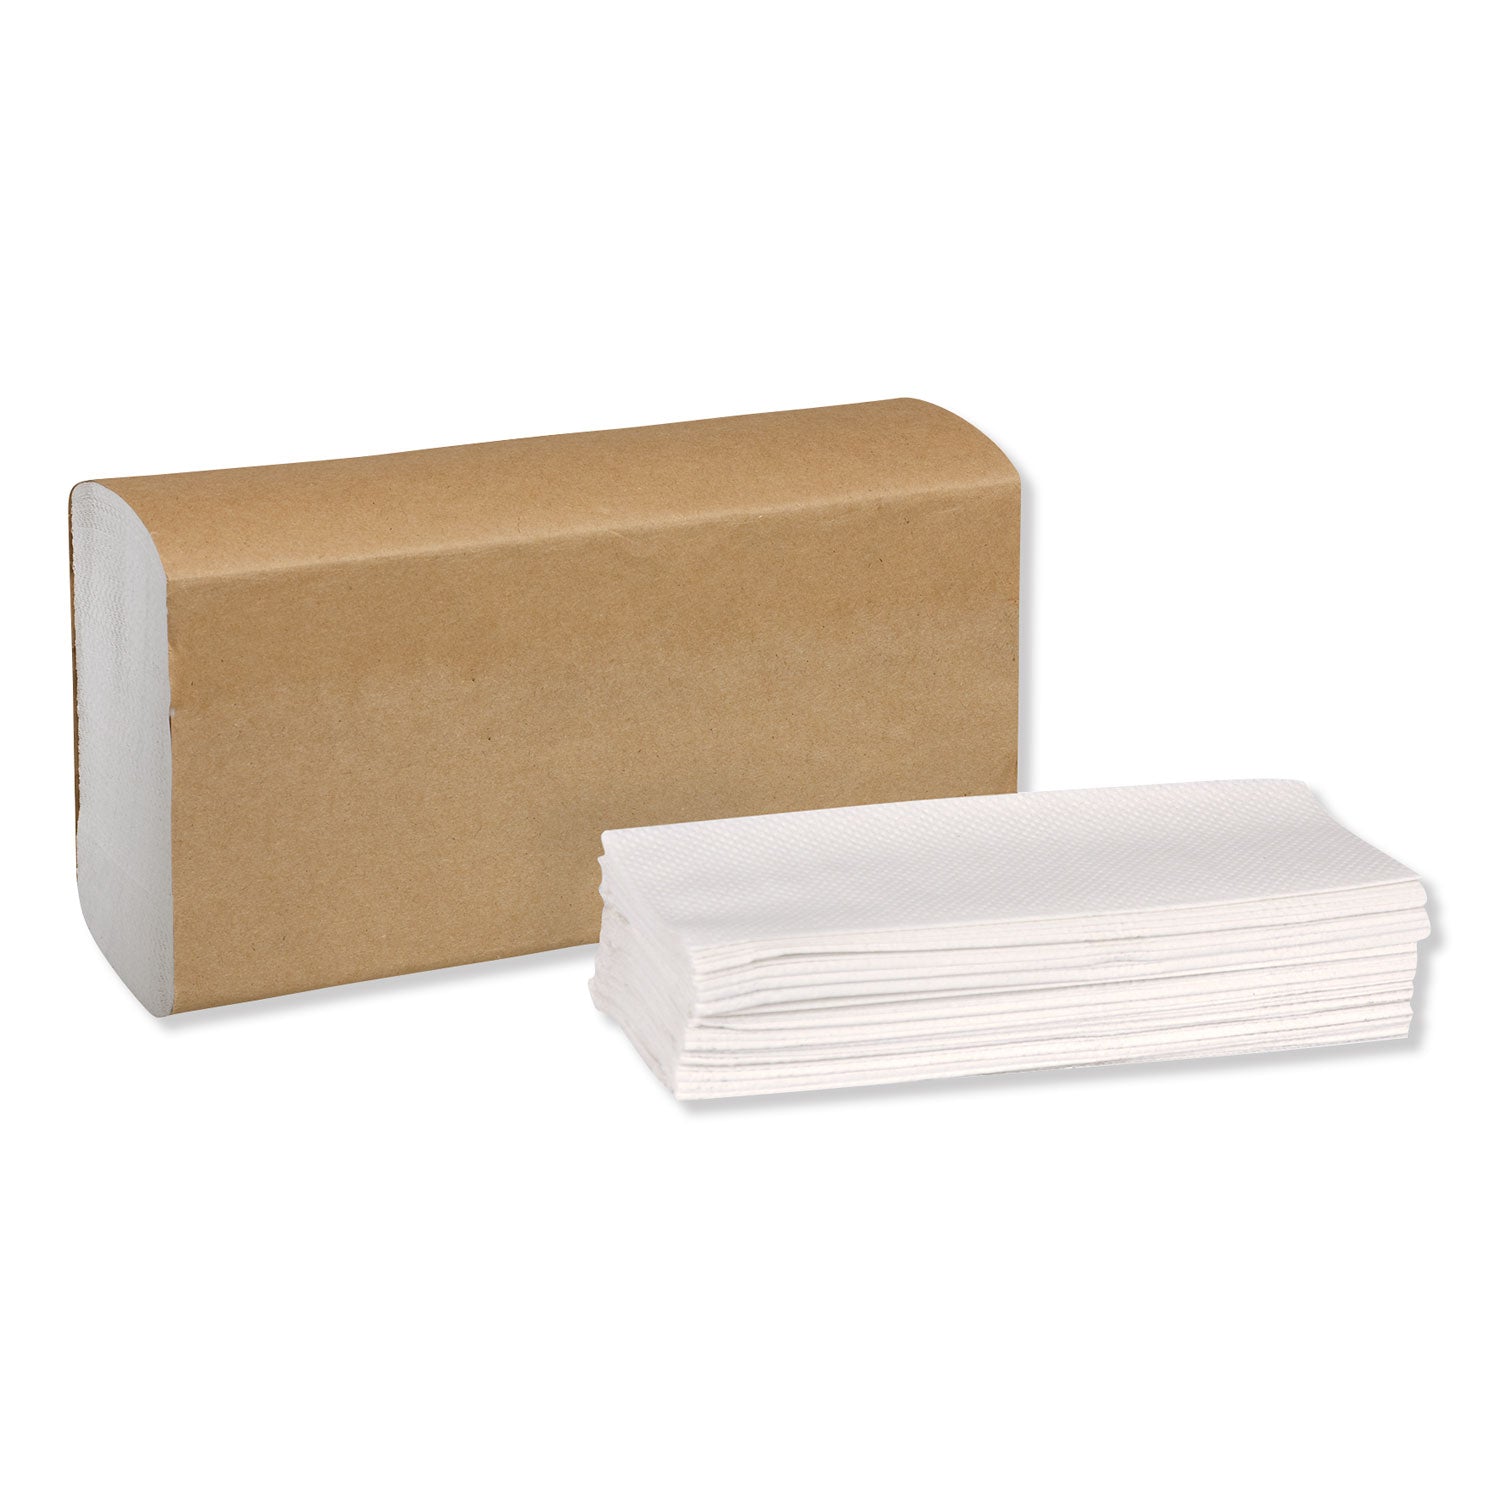 universal-multifold-hand-towel-1-ply-913-x-95-white-250-pack16-packs-carton_trkmb540a - 5